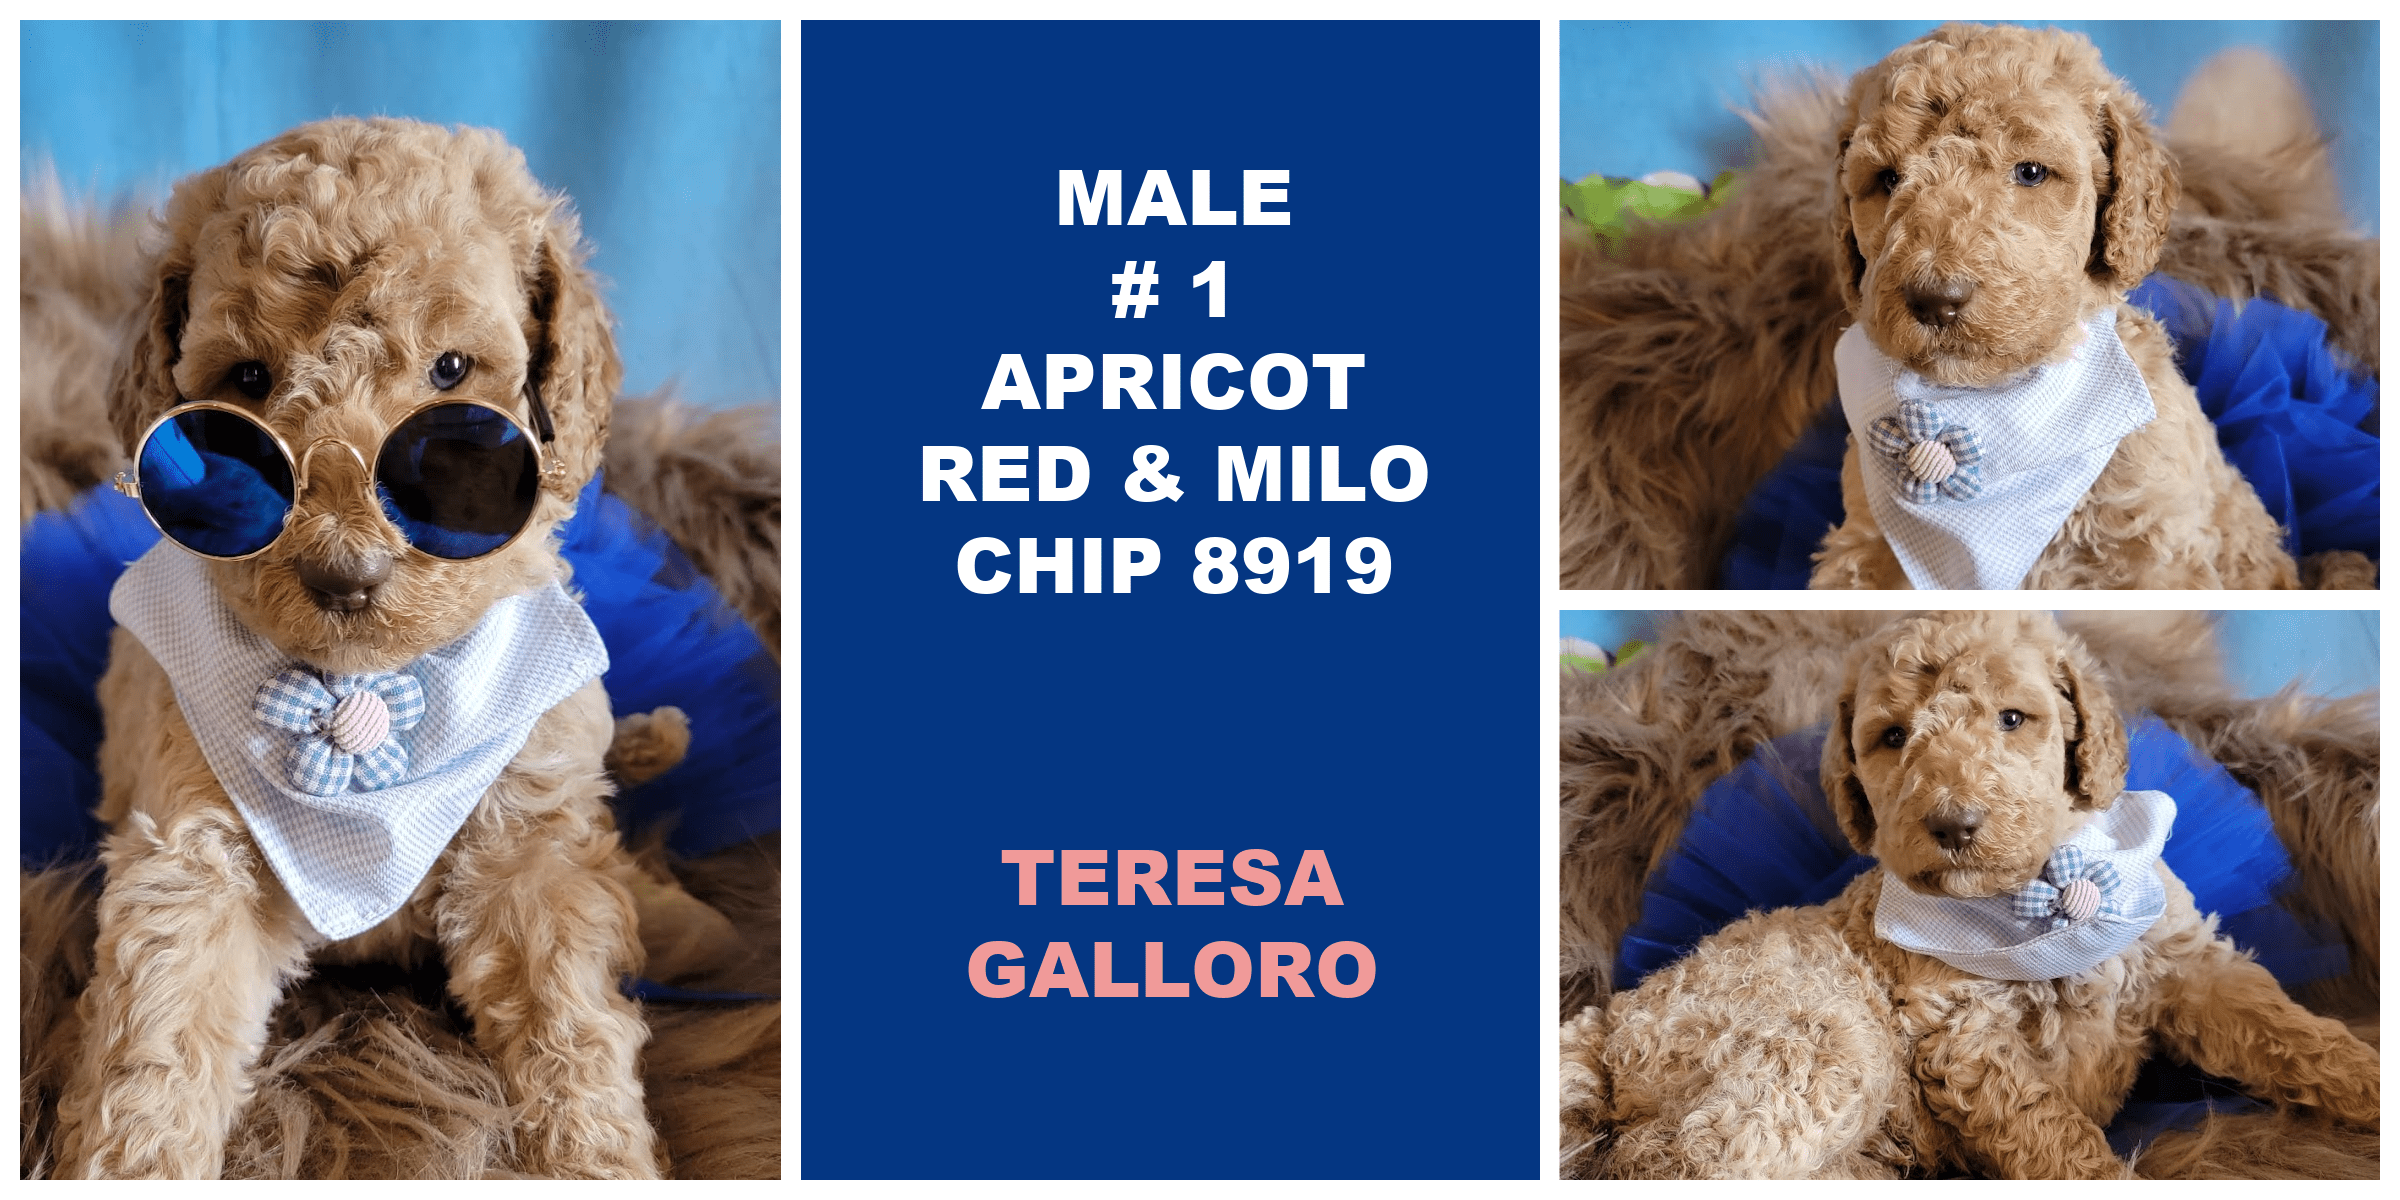 MALE 1 APRICOT RED MILO CHIP 8919